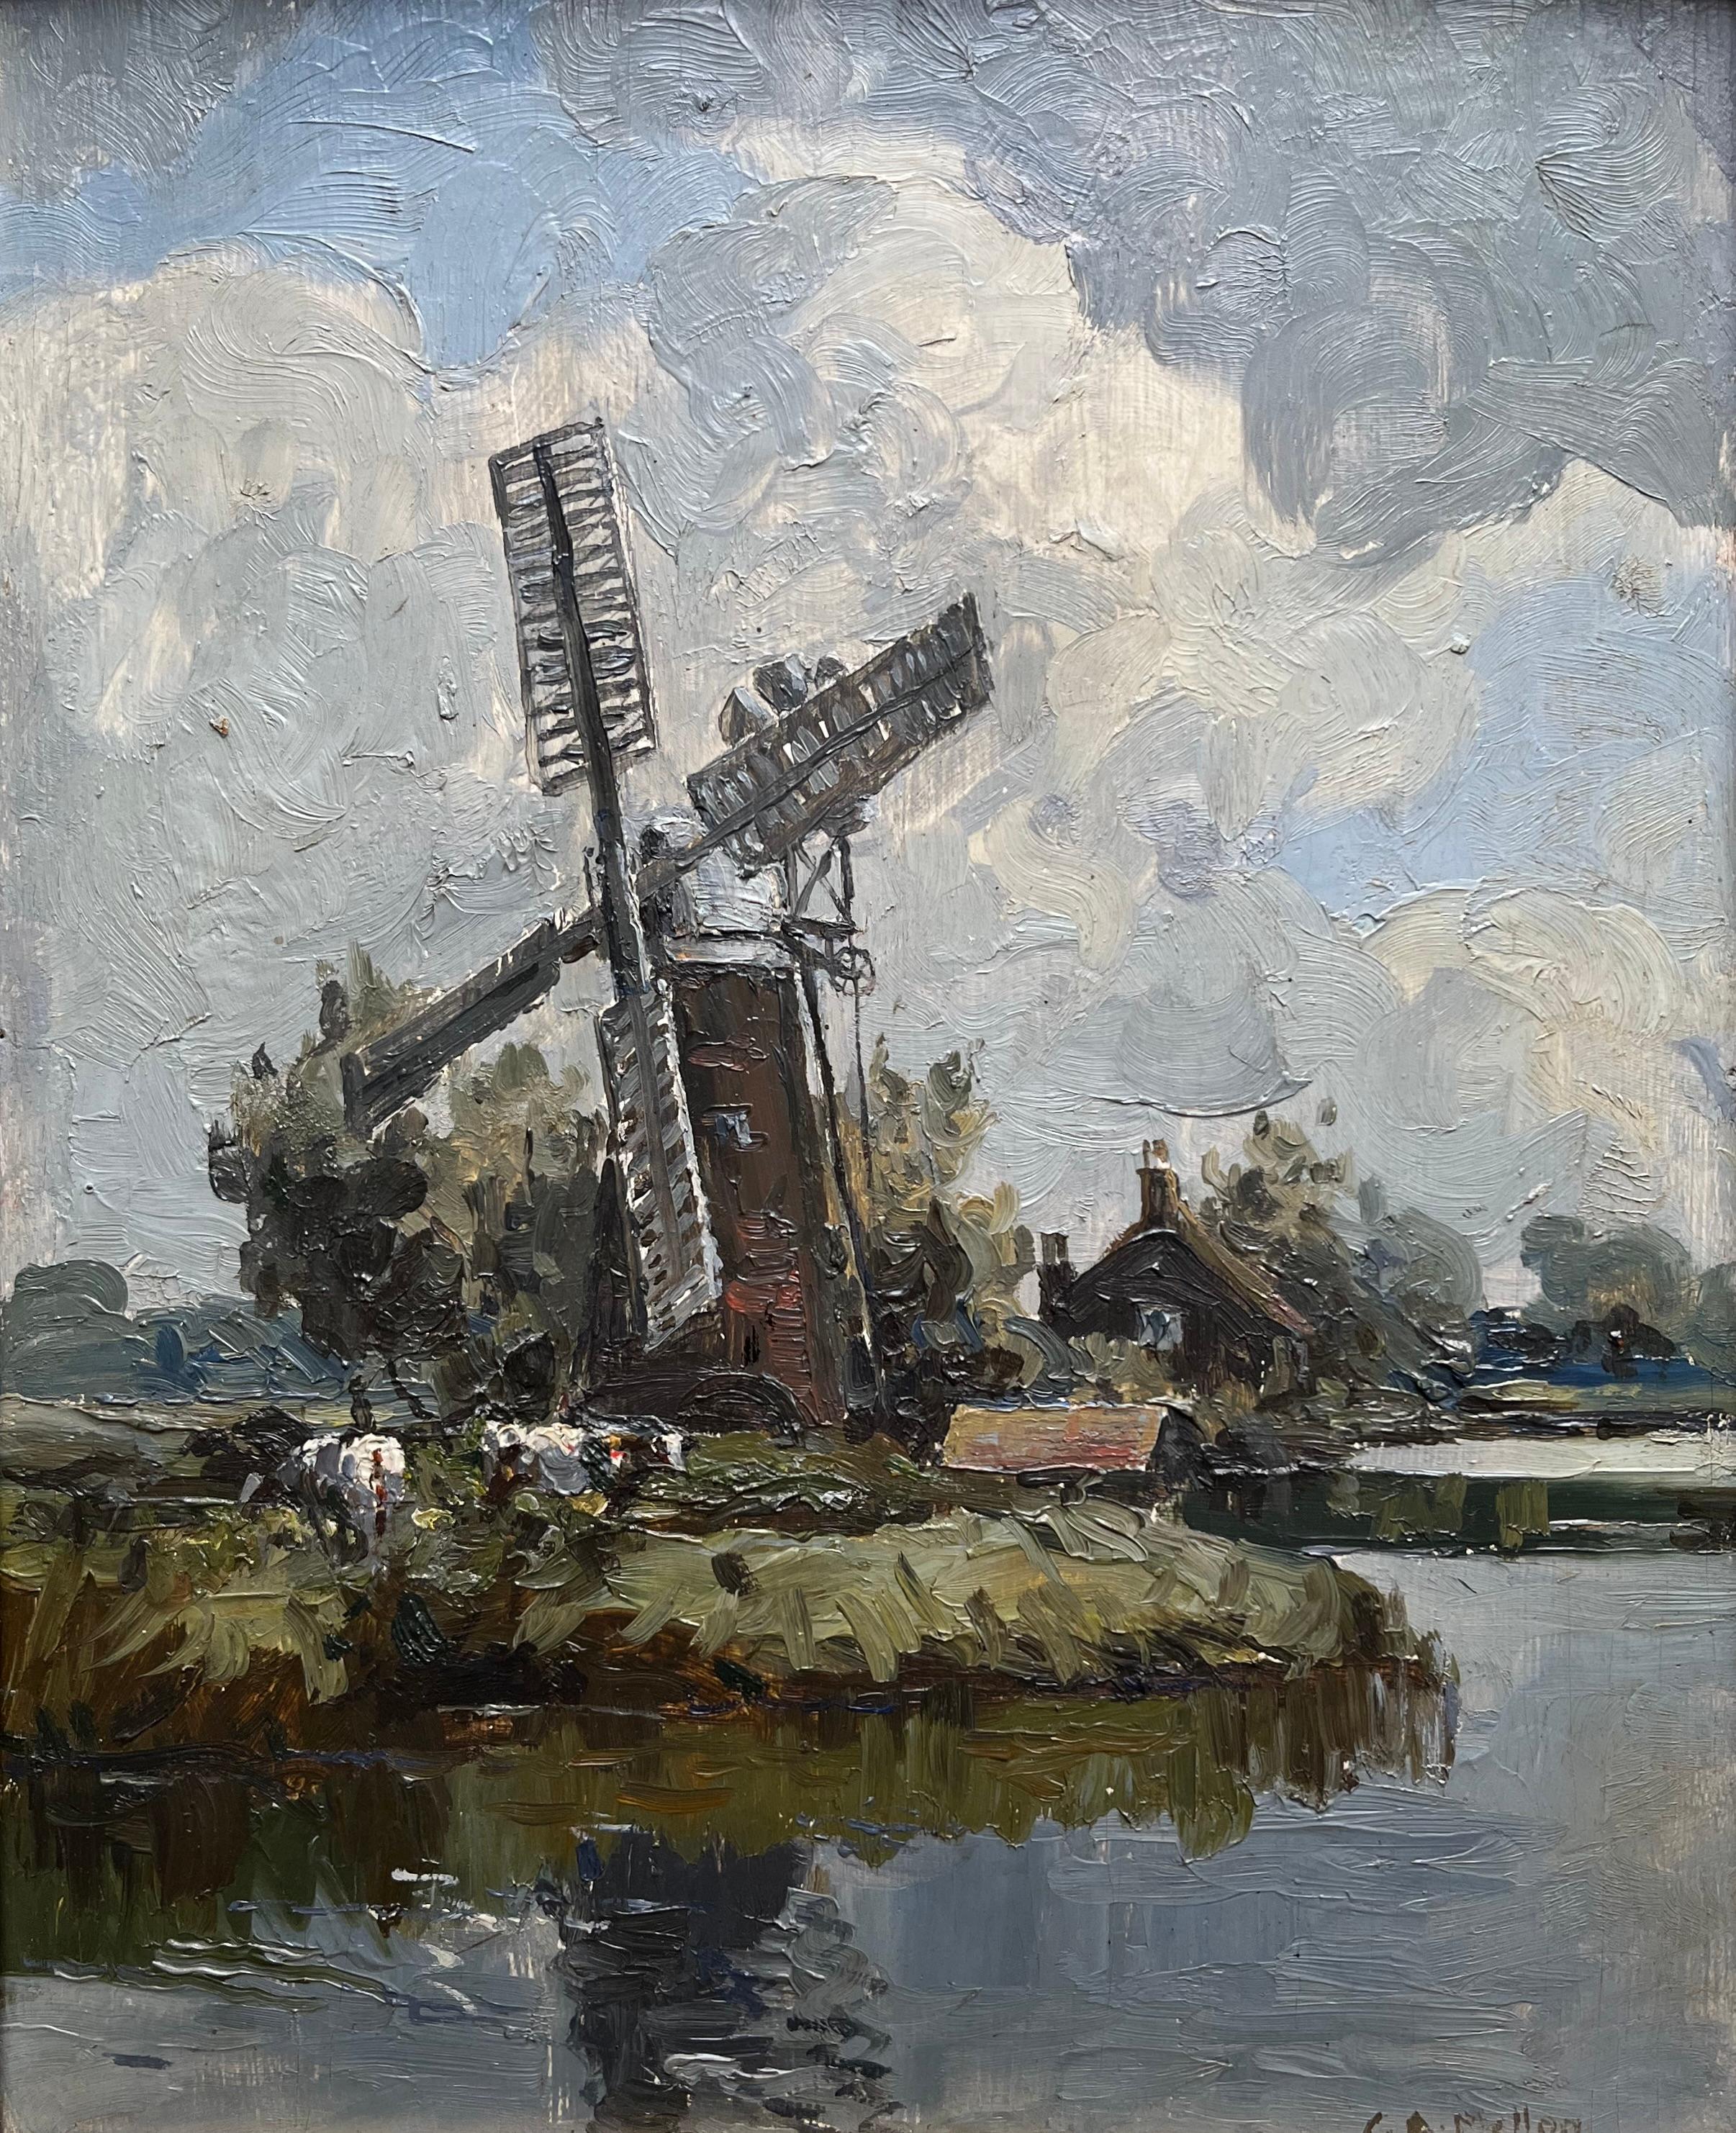 A very attractive impressionist scene of a windmill on the Norfolk Broads painted with wonderful bold brushworks giving the image a lovely impasto effect.

Campbell Archibald Mellon (1876-1955)
Hunsett Mill on the River Ant, Norfolk
Signed
Oil on